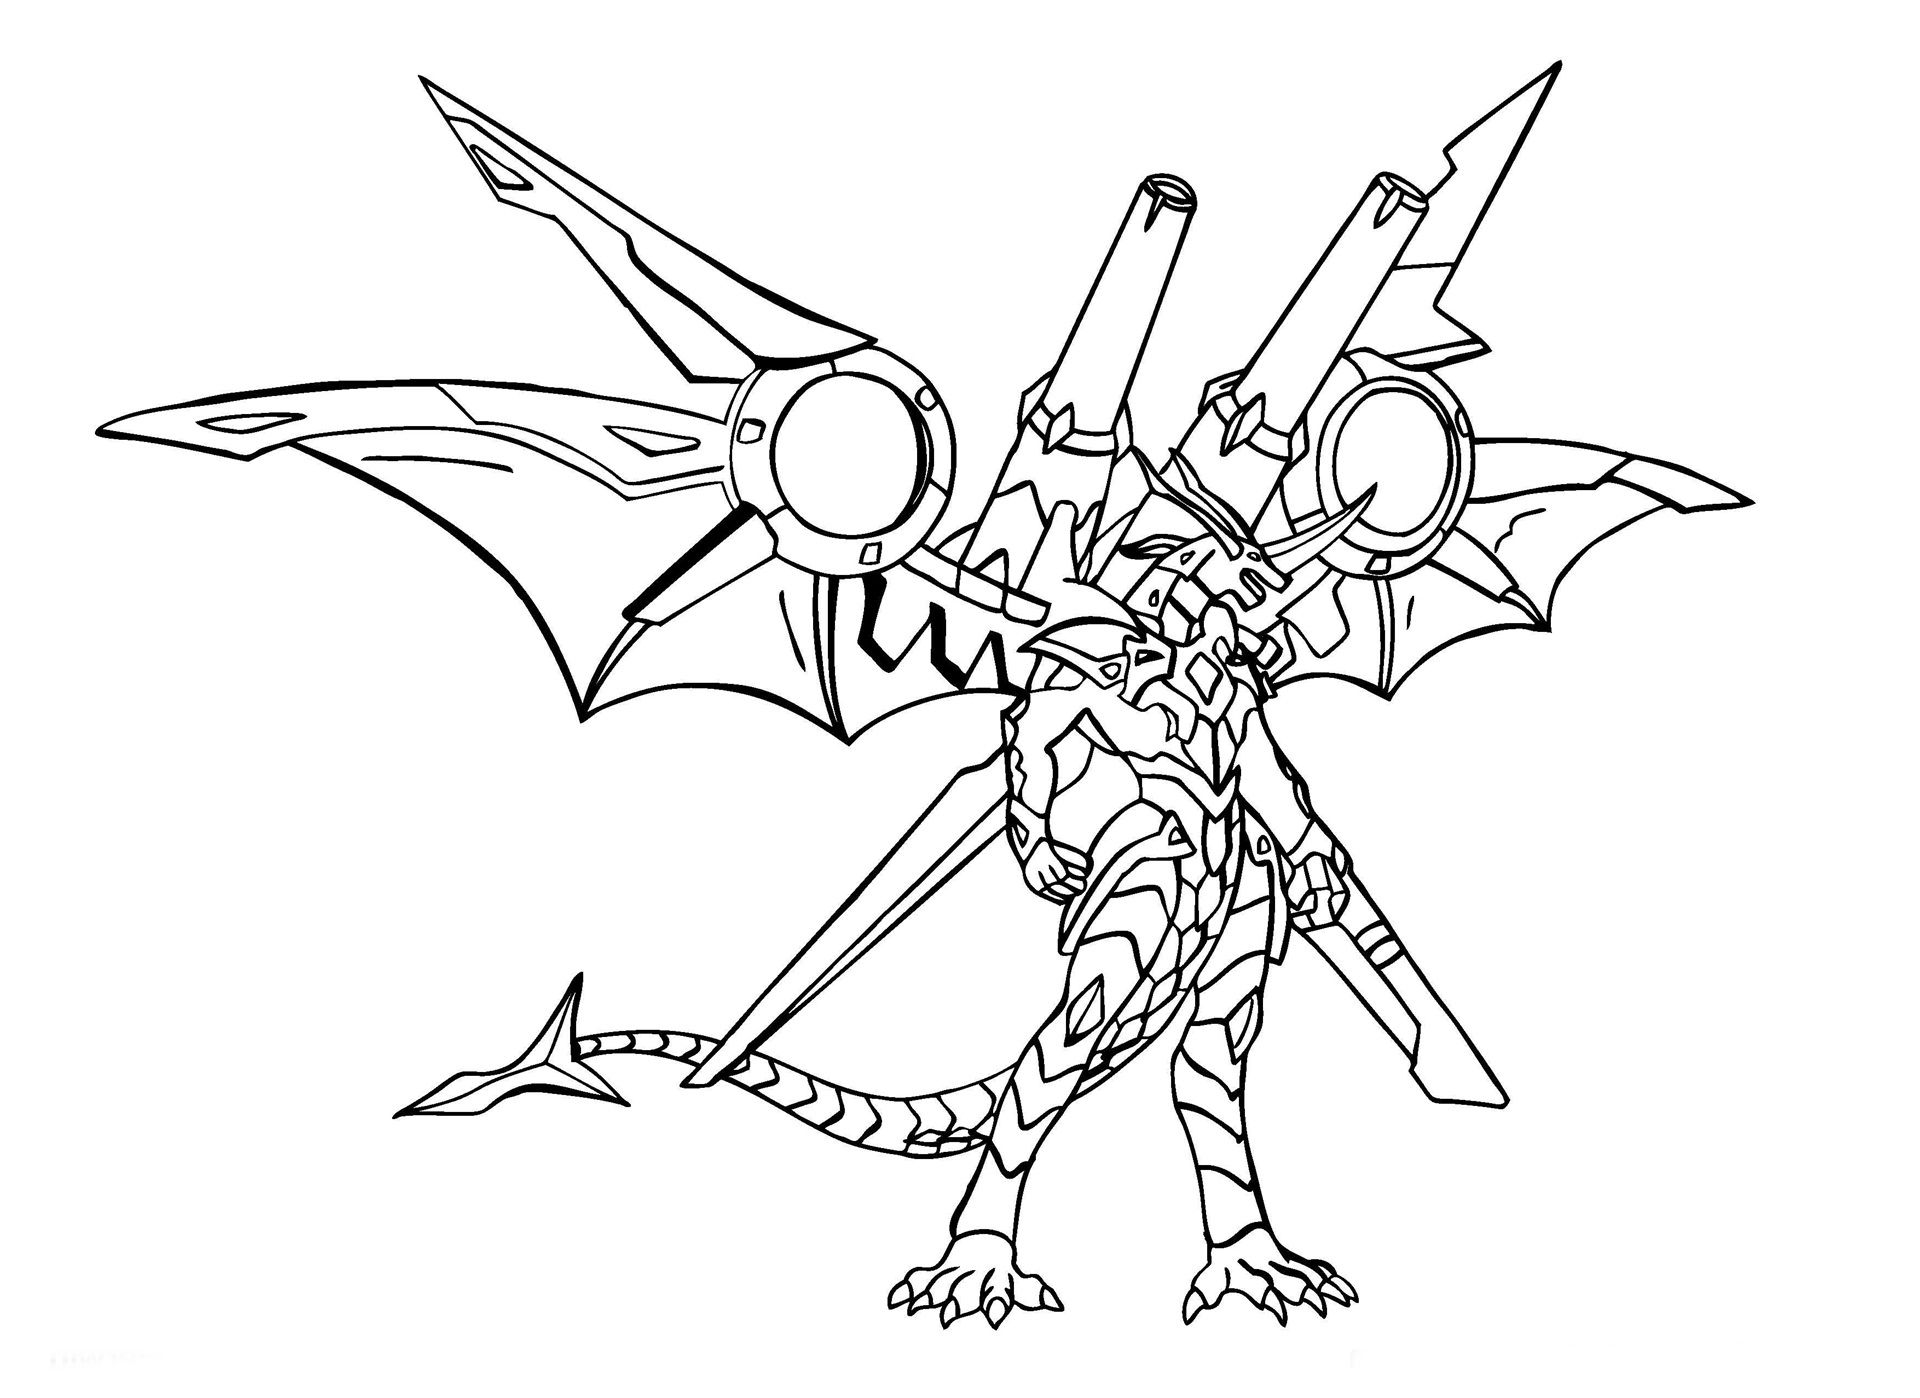 Bakugan New Vestroia Coloring Pages Coloring Home